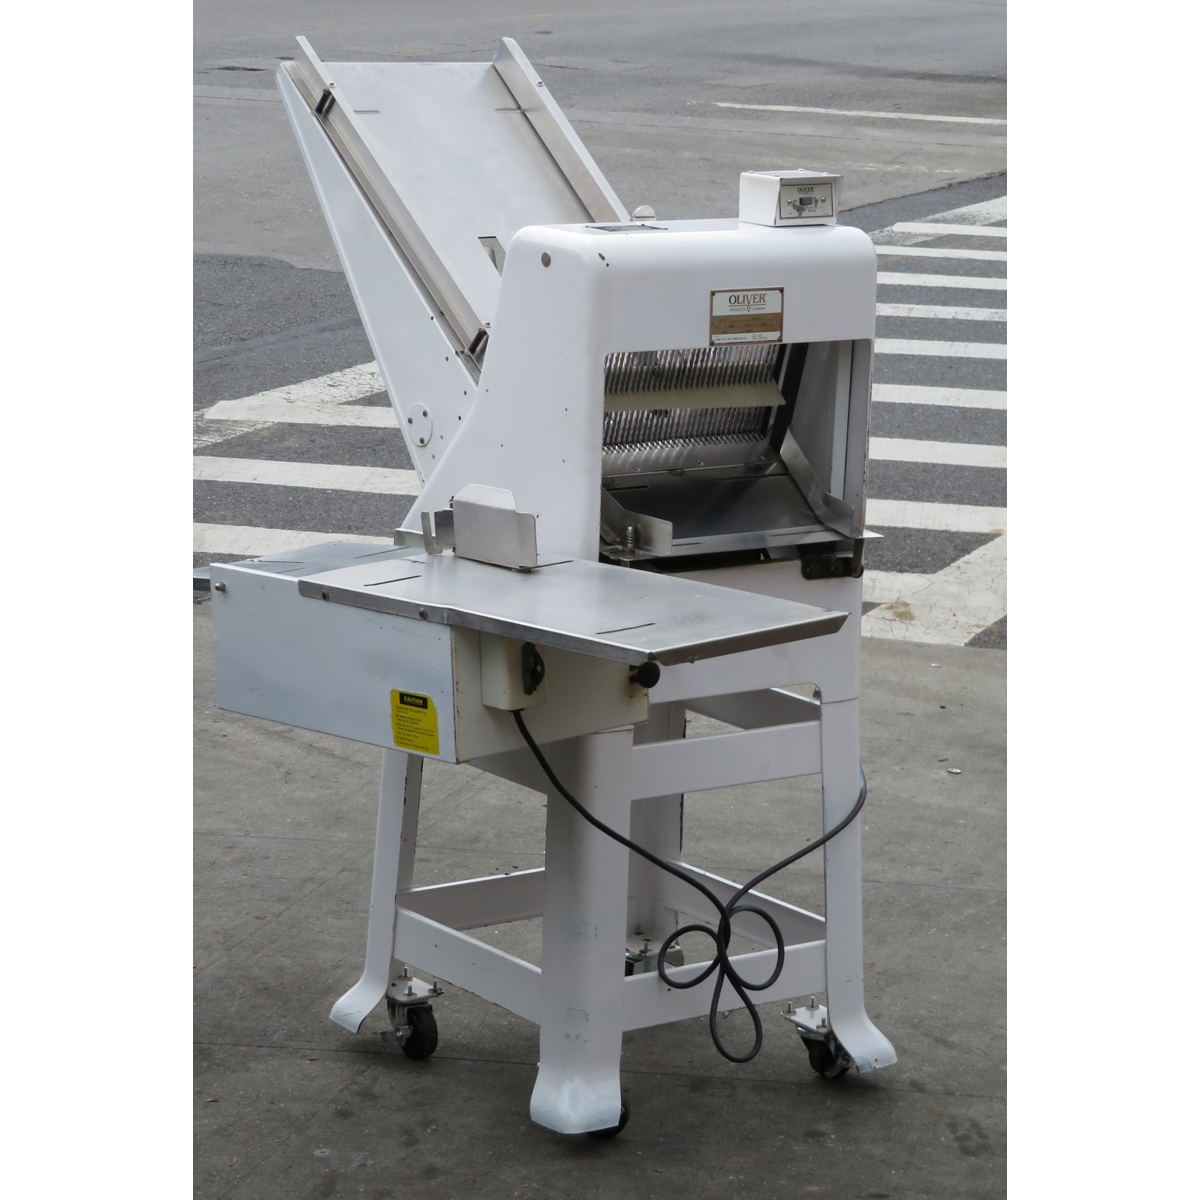 Oliver 797-32 Gravity Feed Bread Slicer 3/8" Cut w/Swing-Away Bagger 1197, Used Excellent Condition image 3